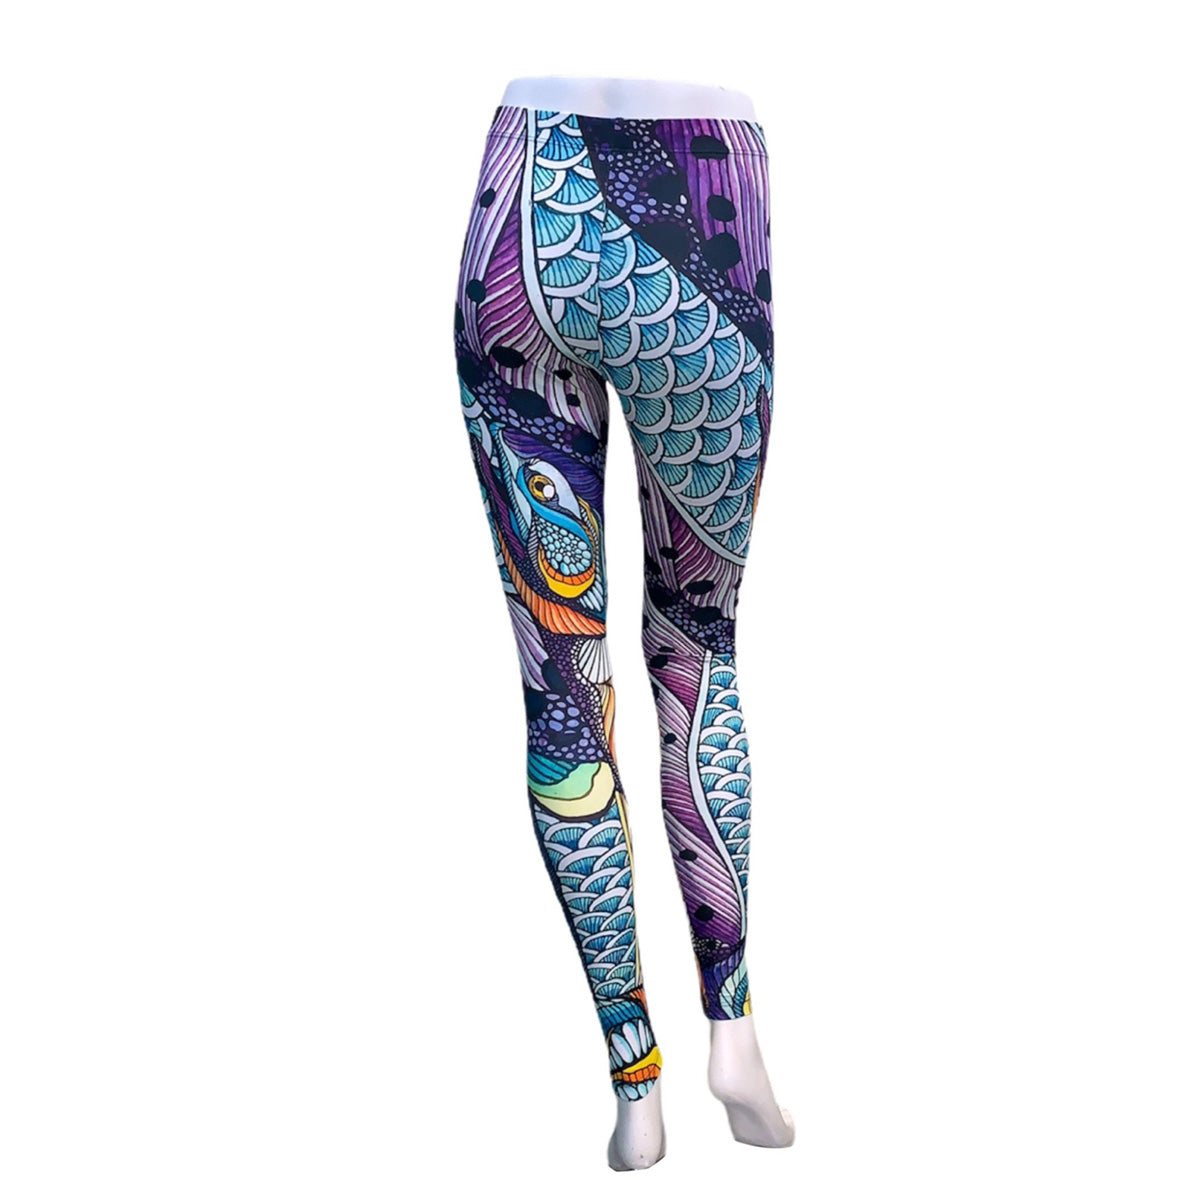 Patagonia W's Maipo 7/8 Tights - Fin & Fire Fly Shop